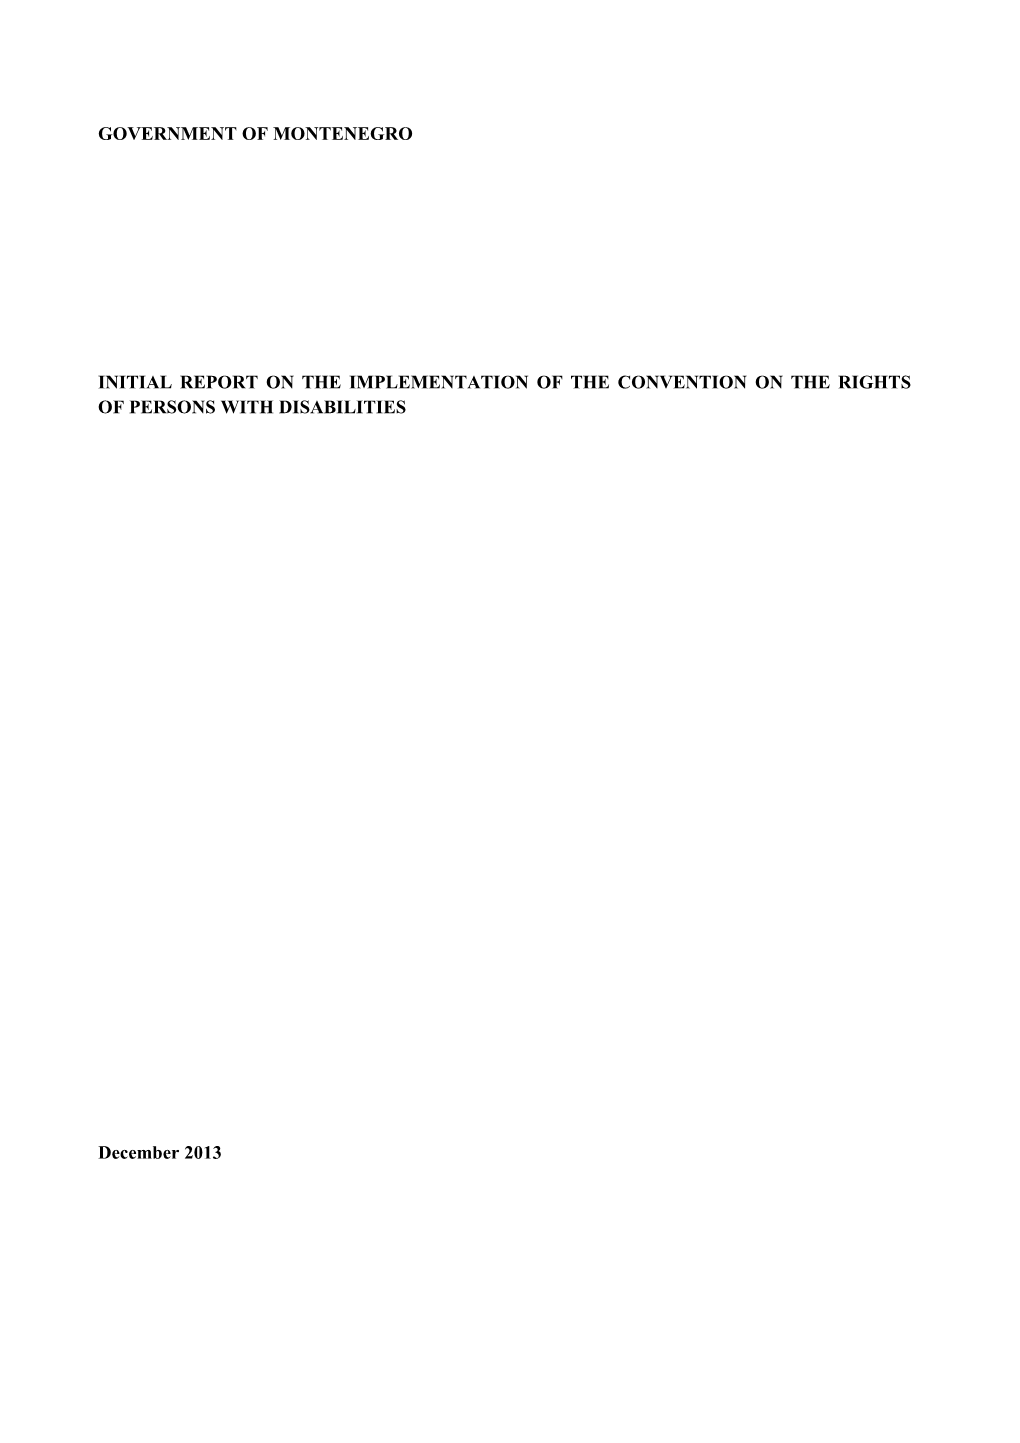 Initial Report on the Implementation of the Convention on the Rights of Persons With